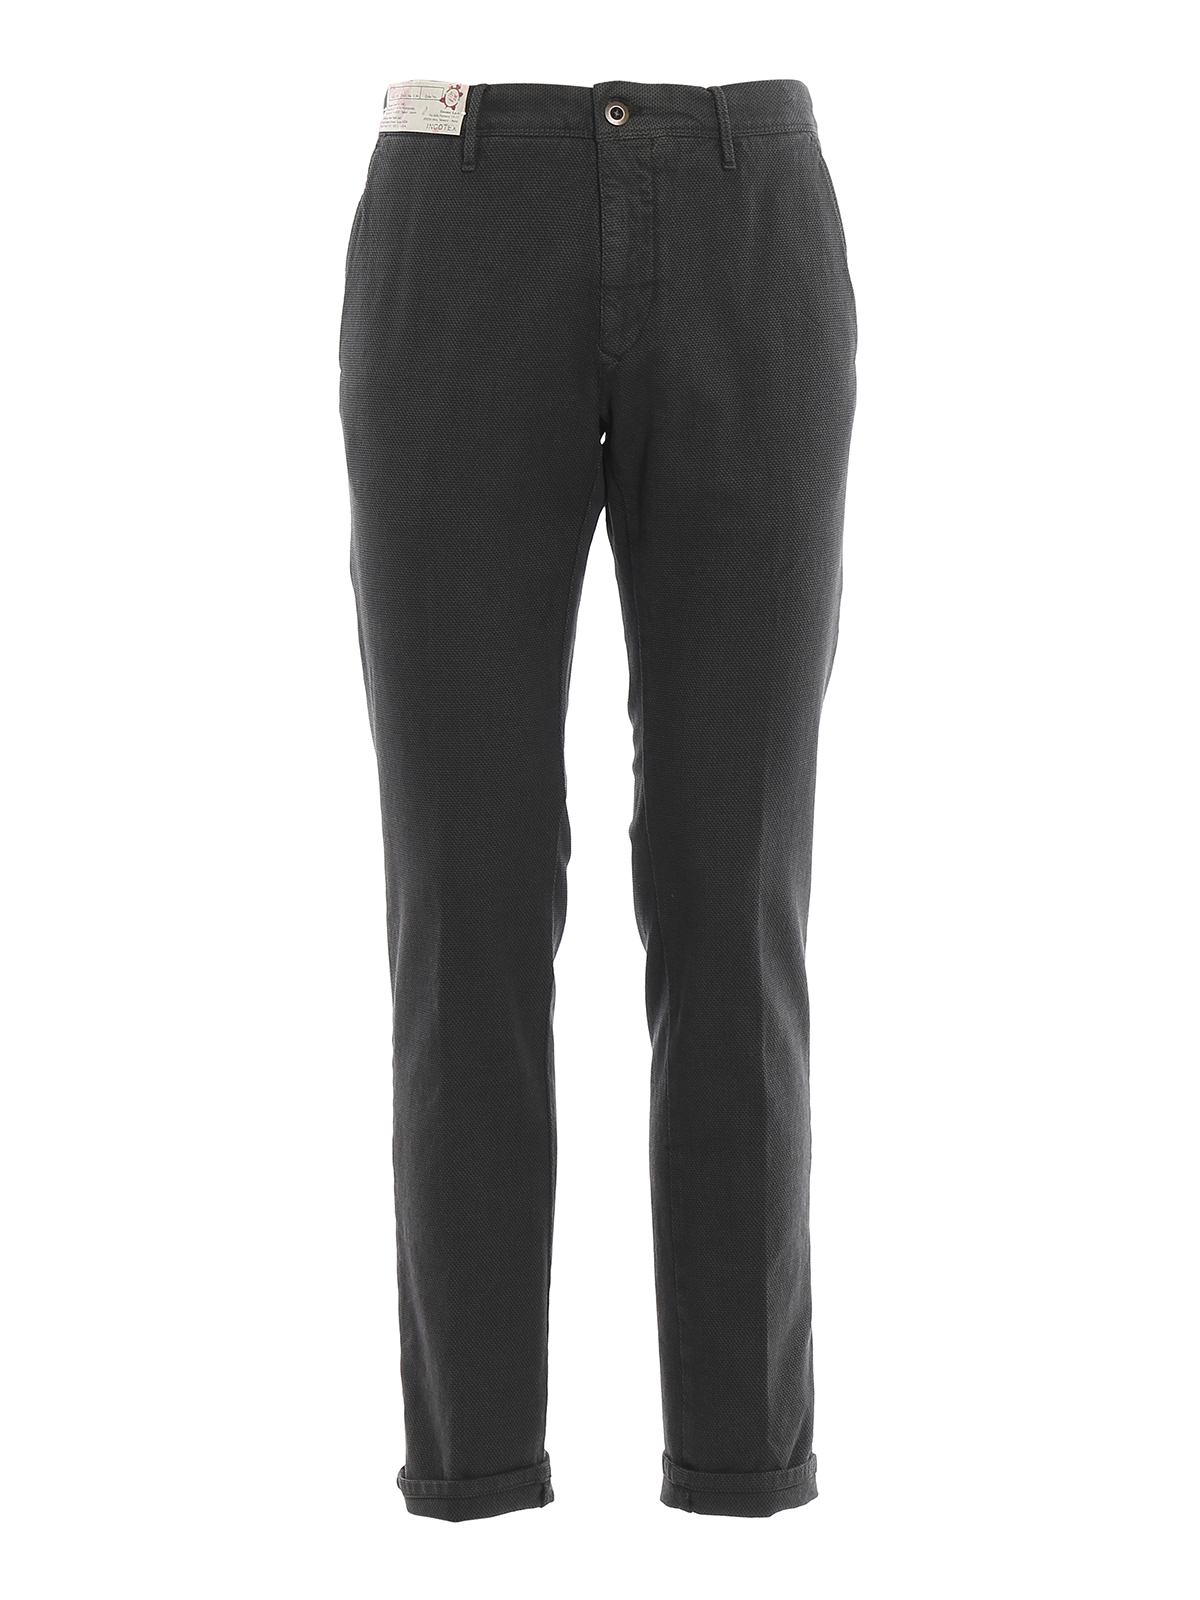 INCOTEX GREY TEXTURED COTTON TROUSERS